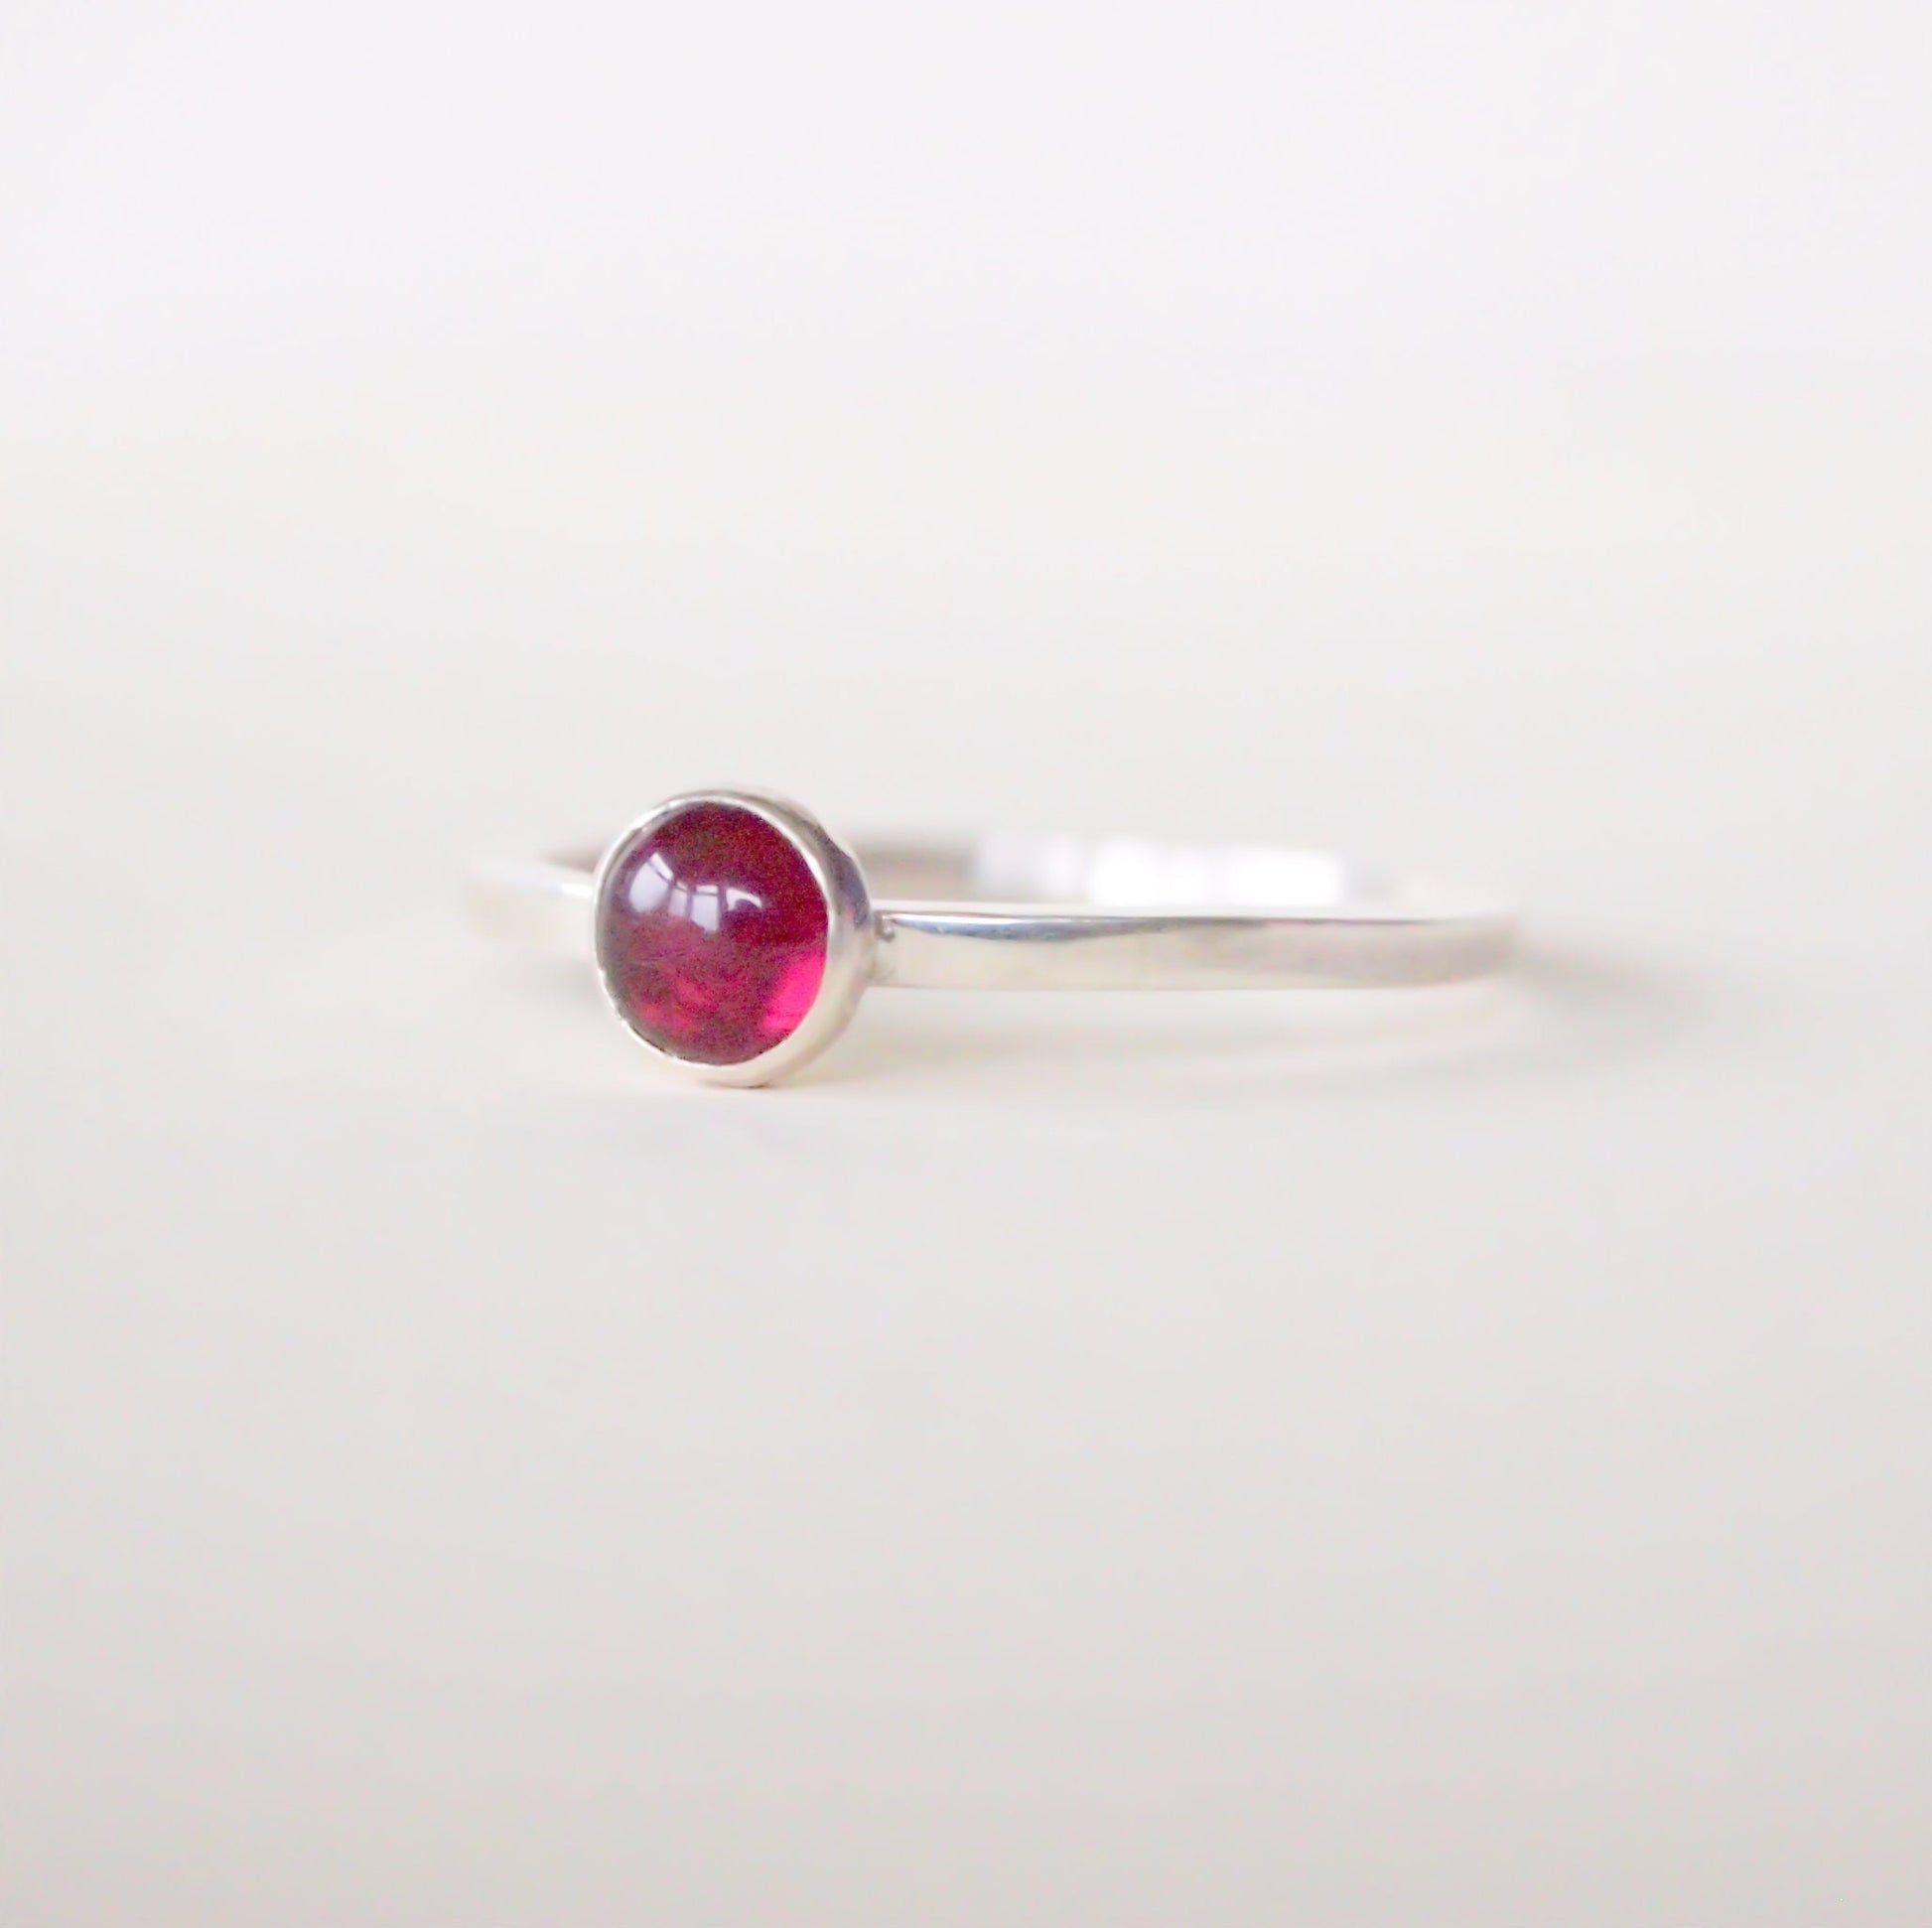 Sterling Silver and Garnet birthstone ring with a rich red 5mm round garnet. Handcrafted in Scotland by Maram Jewellery